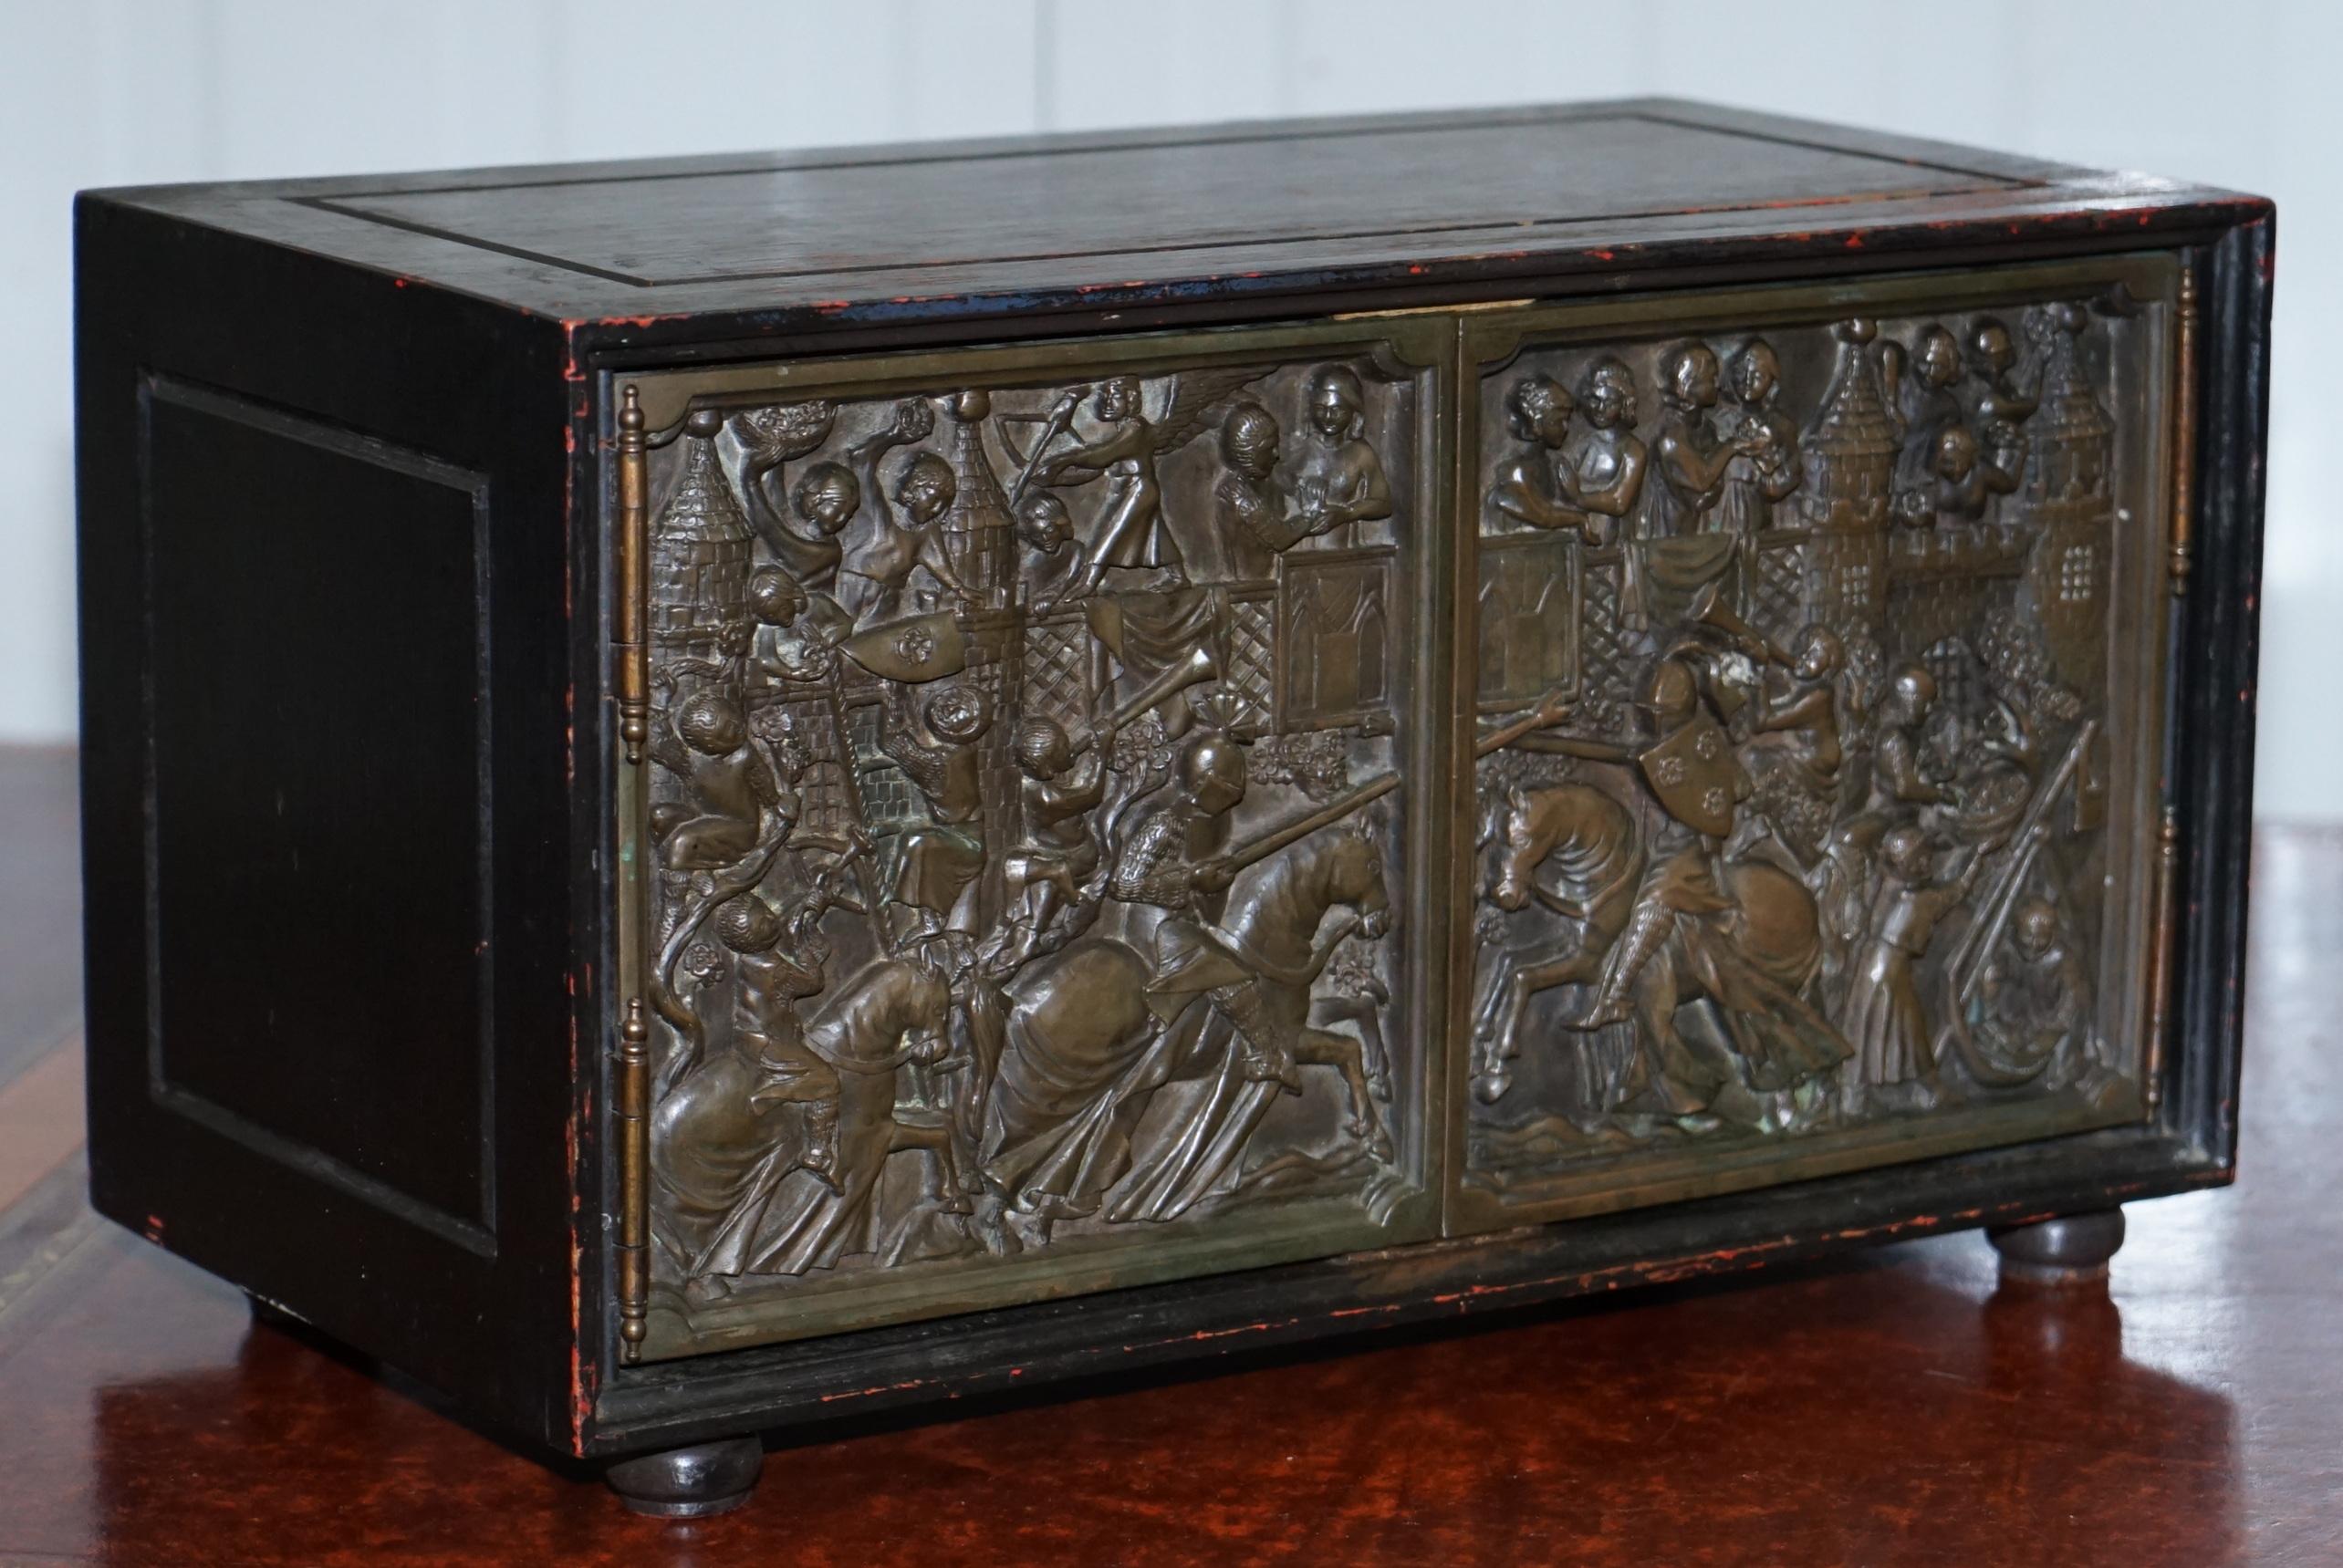 We are delighted to offer for sale this lovely small cabinet with Bronze doors depicting a jousting tournament

A good looking and very decorative little table top cupboard with very nicely cast bronze doors

We have lightly cleaned waxed and